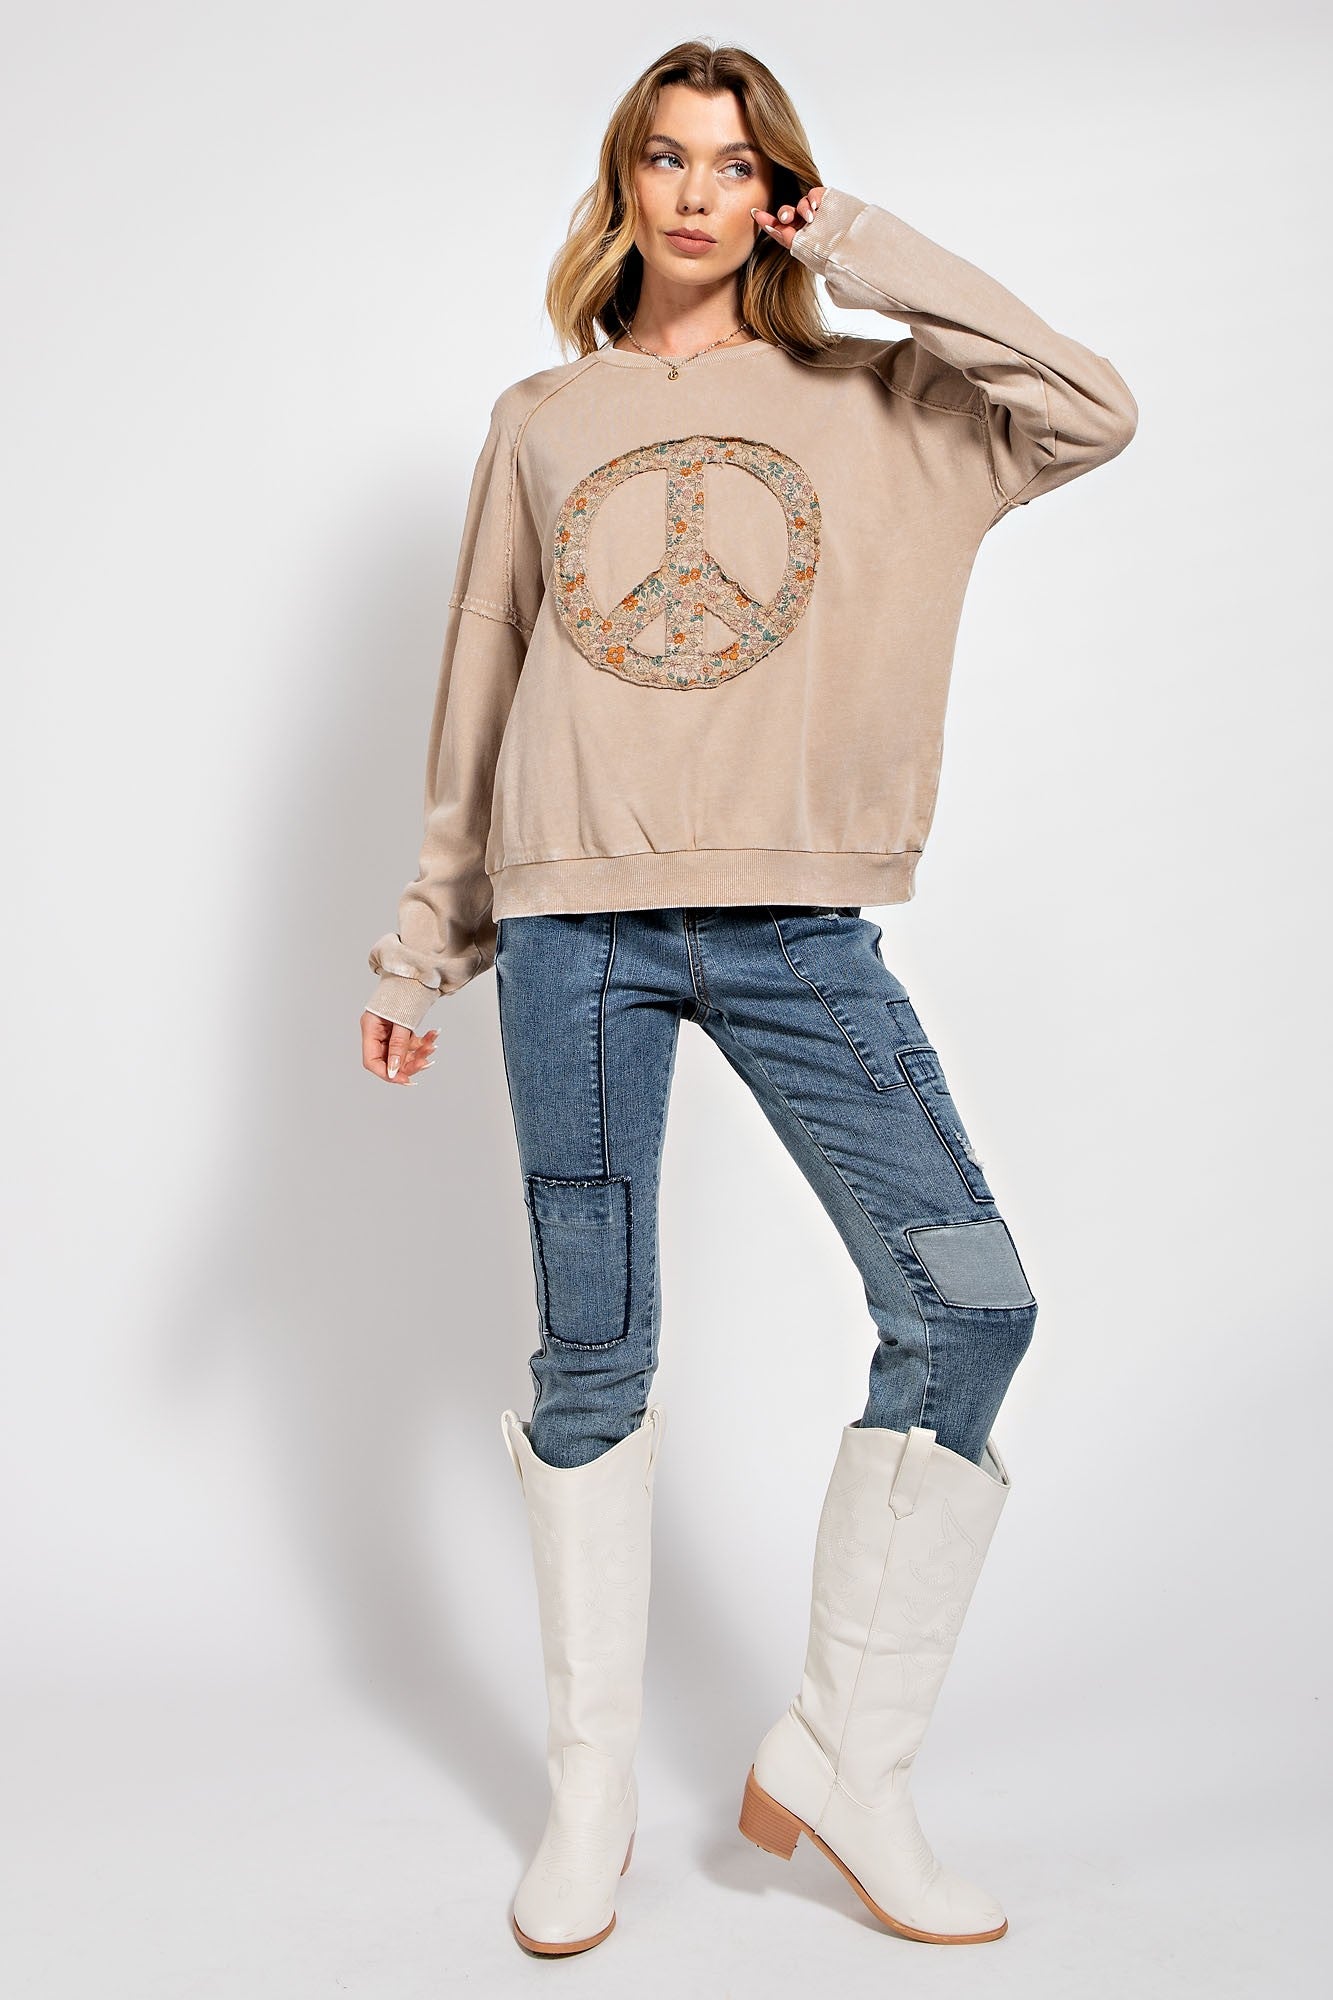 Melissa Mineral Washed Peace Sign Top in Mushroom